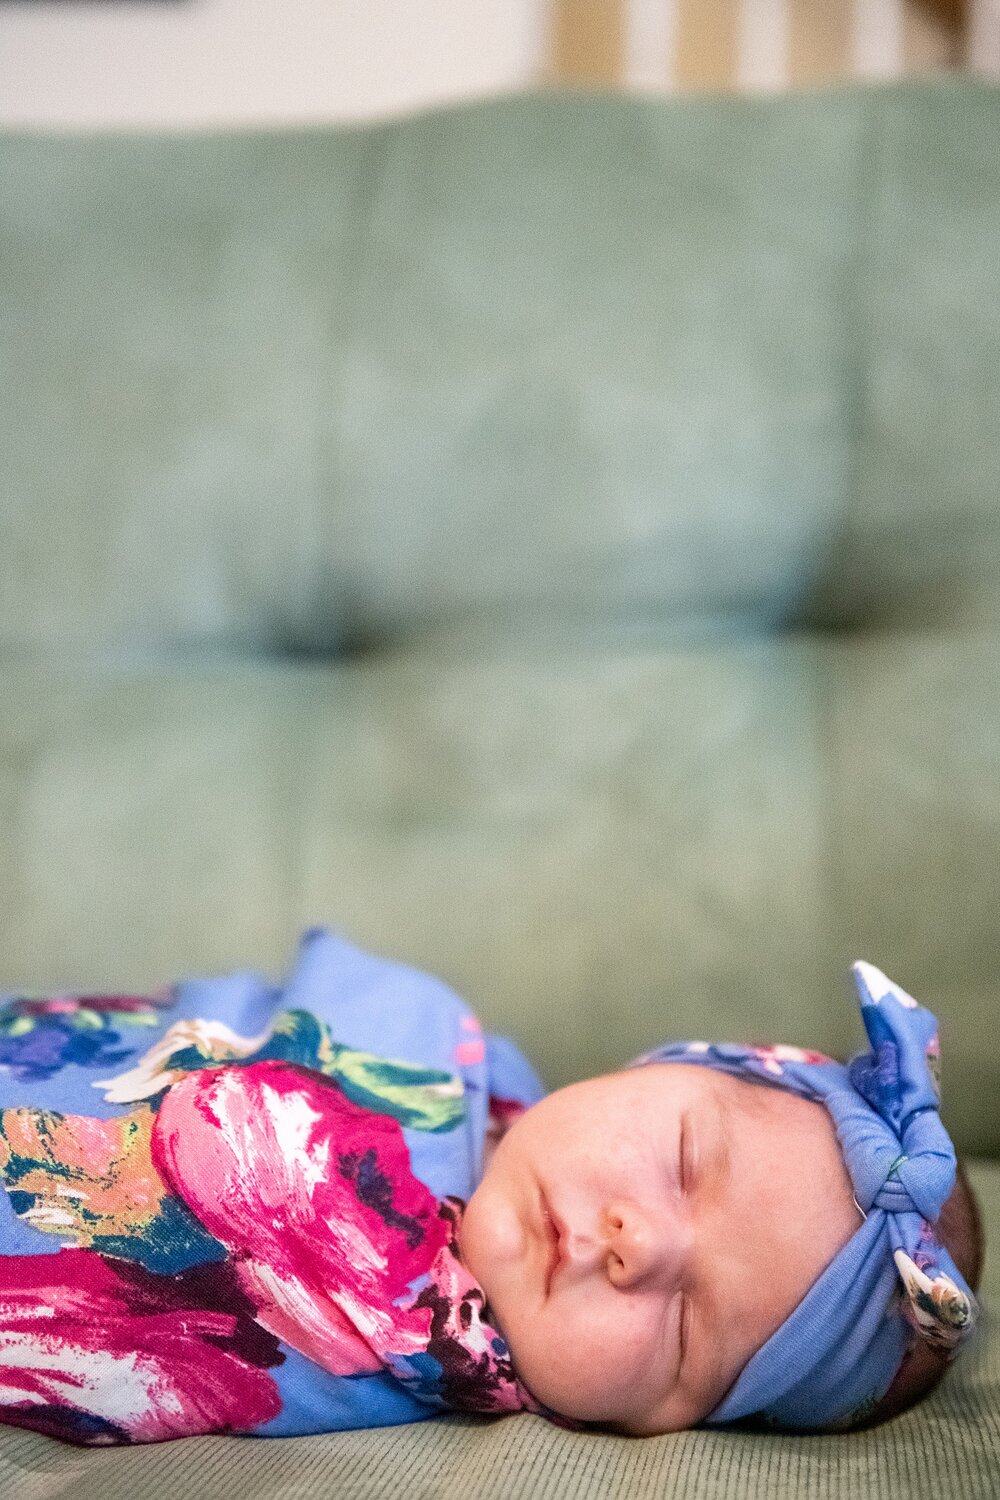 In home lifestyle newborn portraits in Frederick MD with Wendy Zook Photography | Family of four welcomes new baby, baby girl newborn photos at home, Maryland newborn photographer